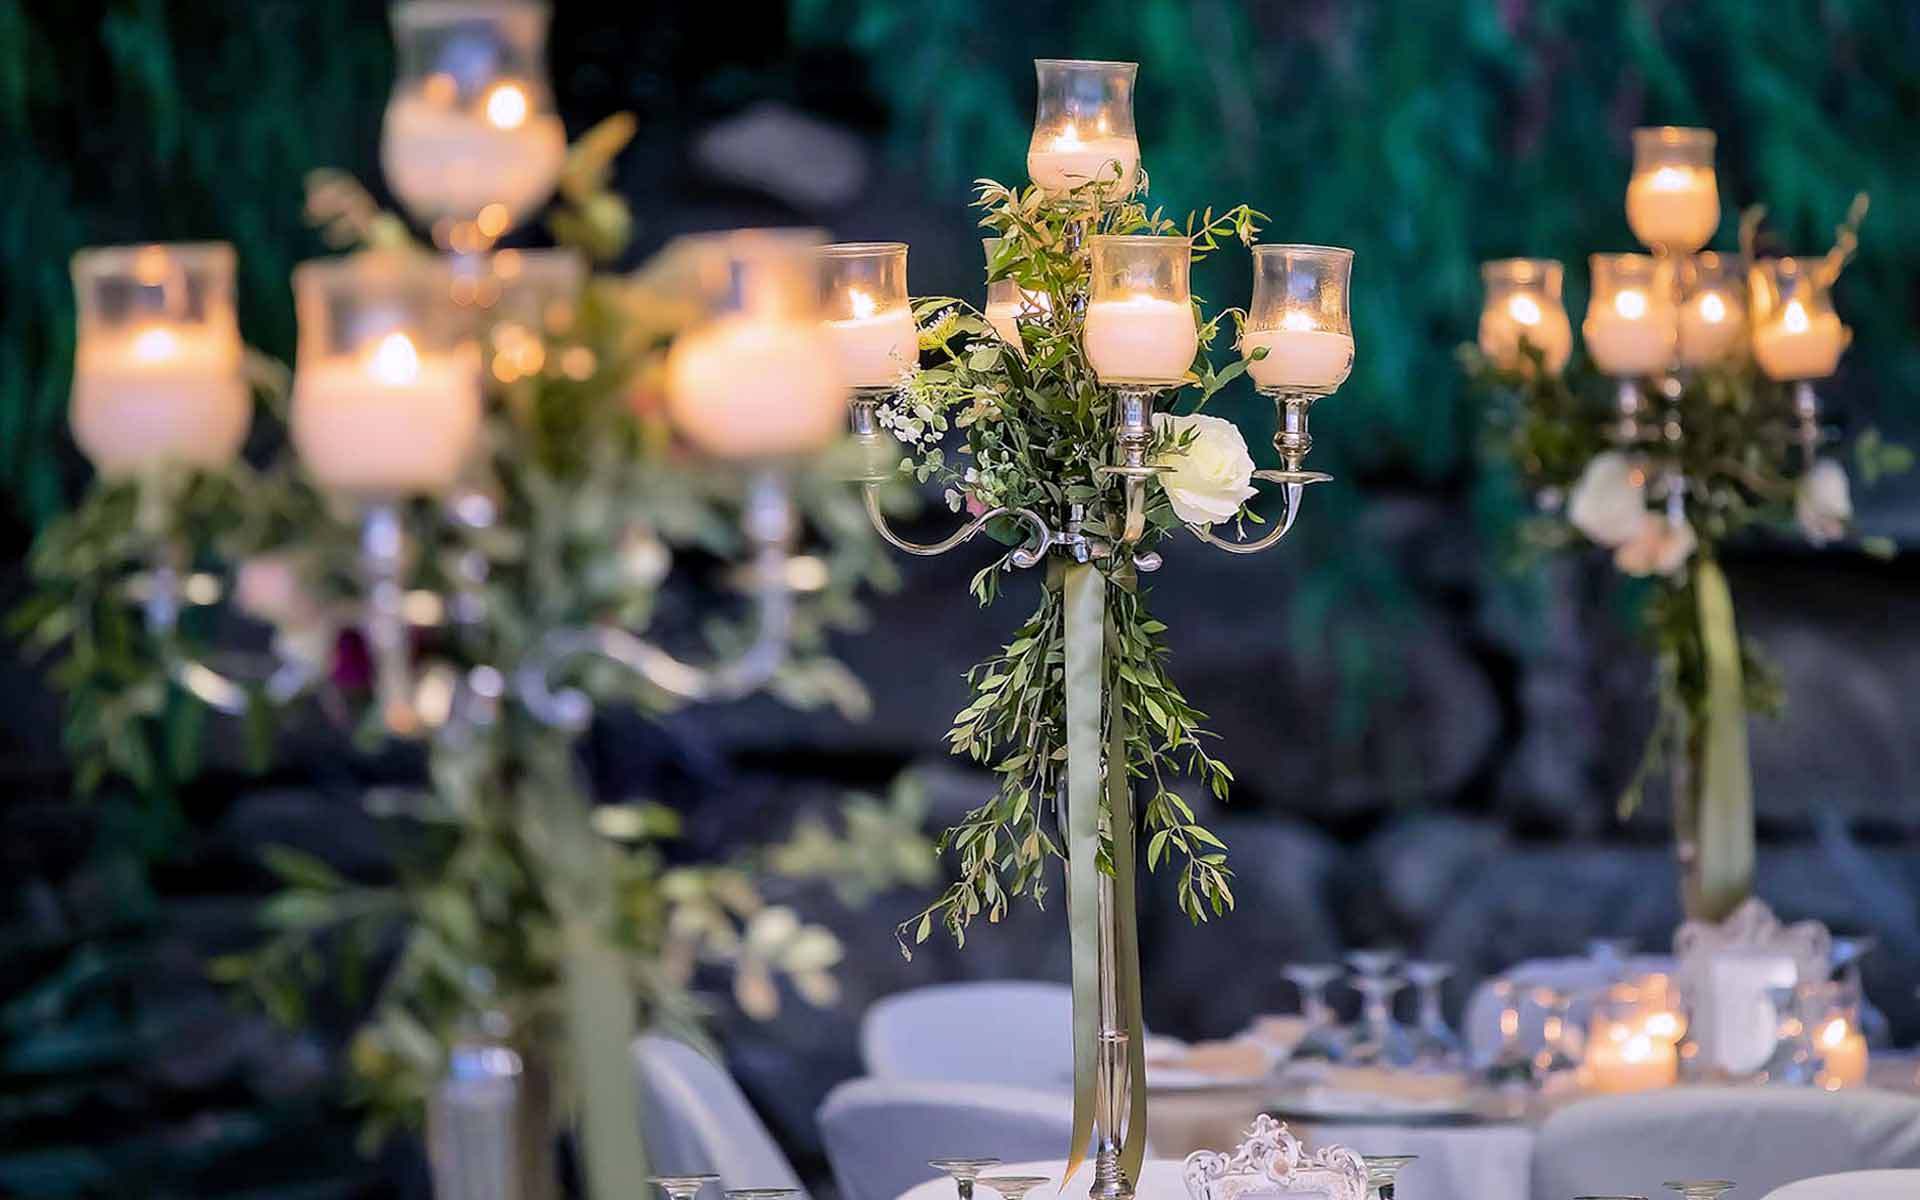 Rustic wedding table decor with candelabras with olive leaf, garland, roses & green ribbons